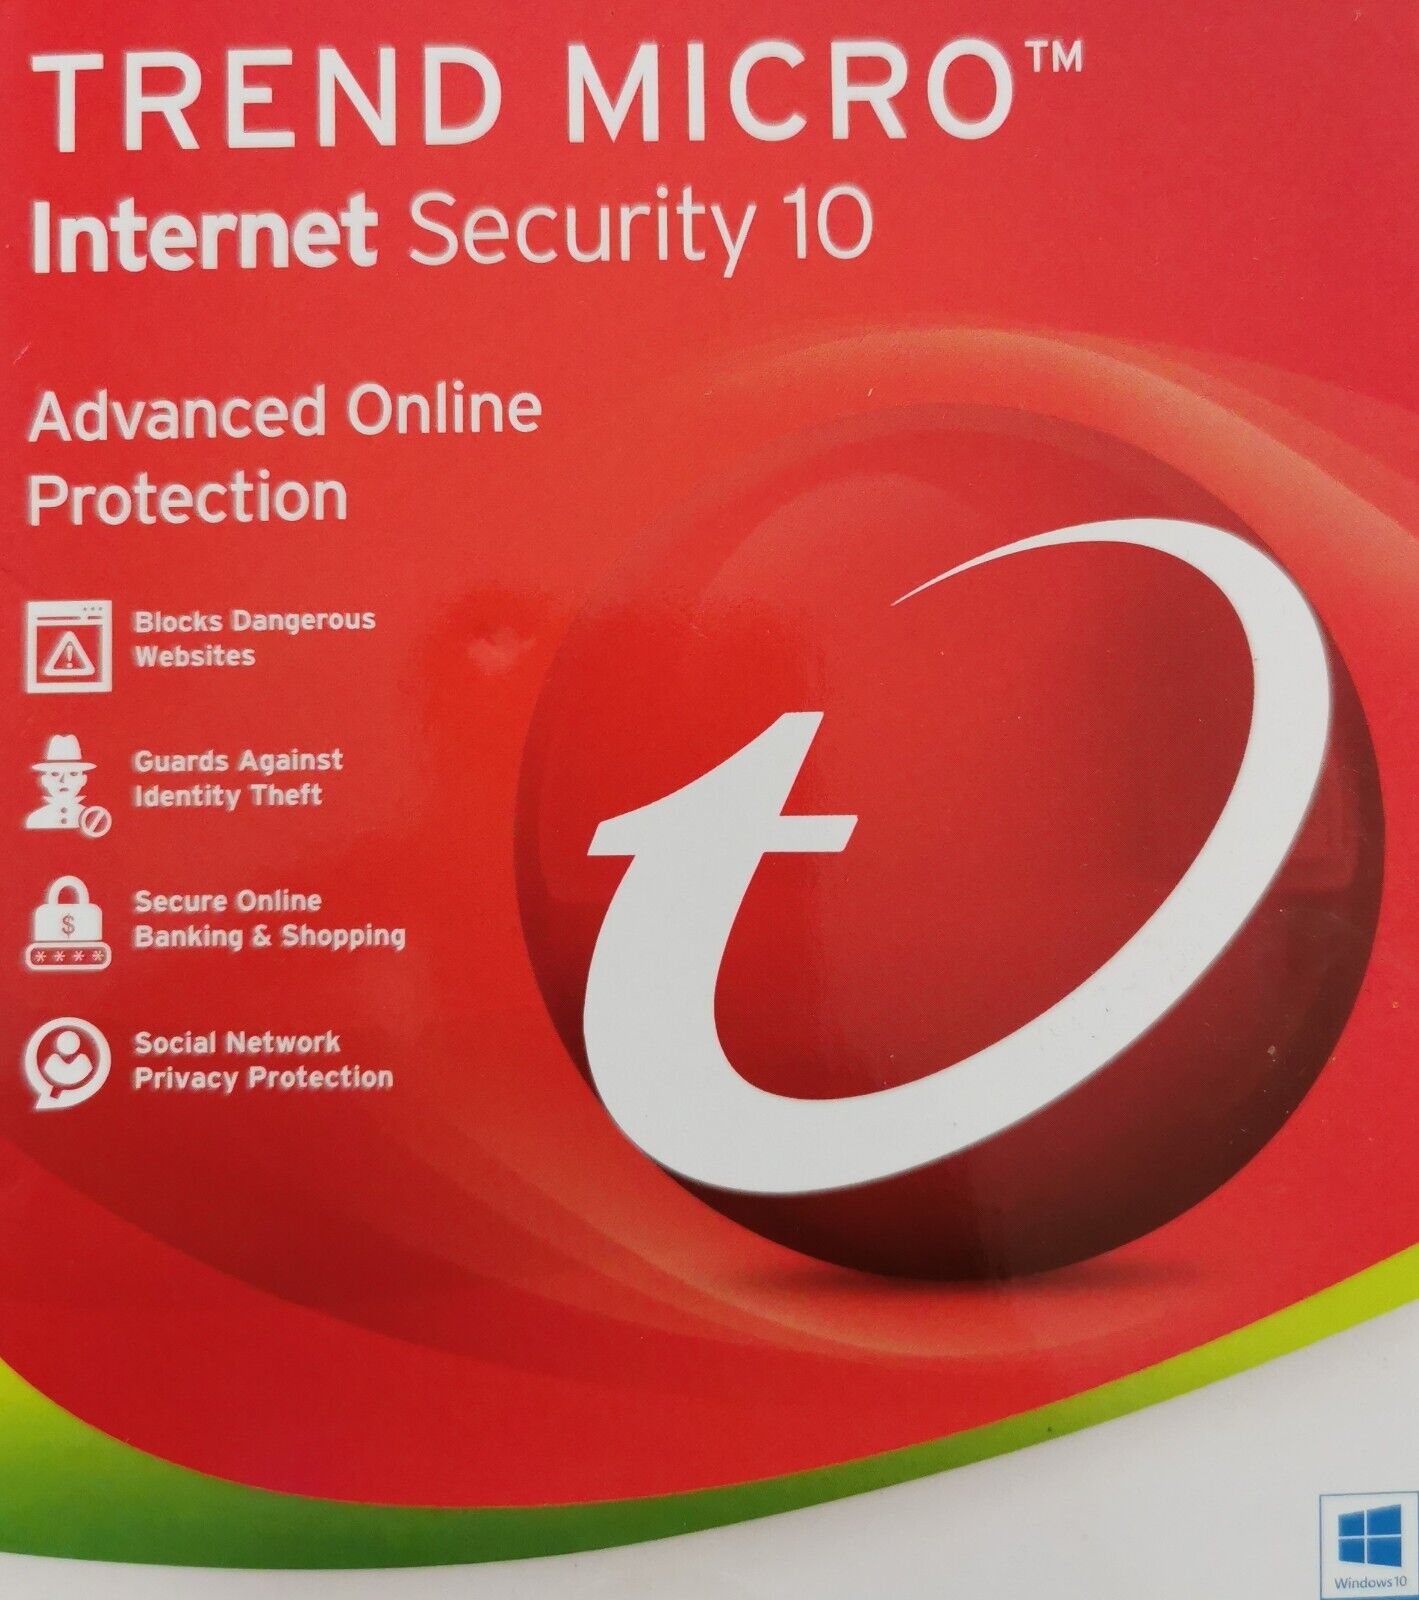 TREND MICRO Internet Security 10 - Advanced Online Protection Trend Micro Trend Micro